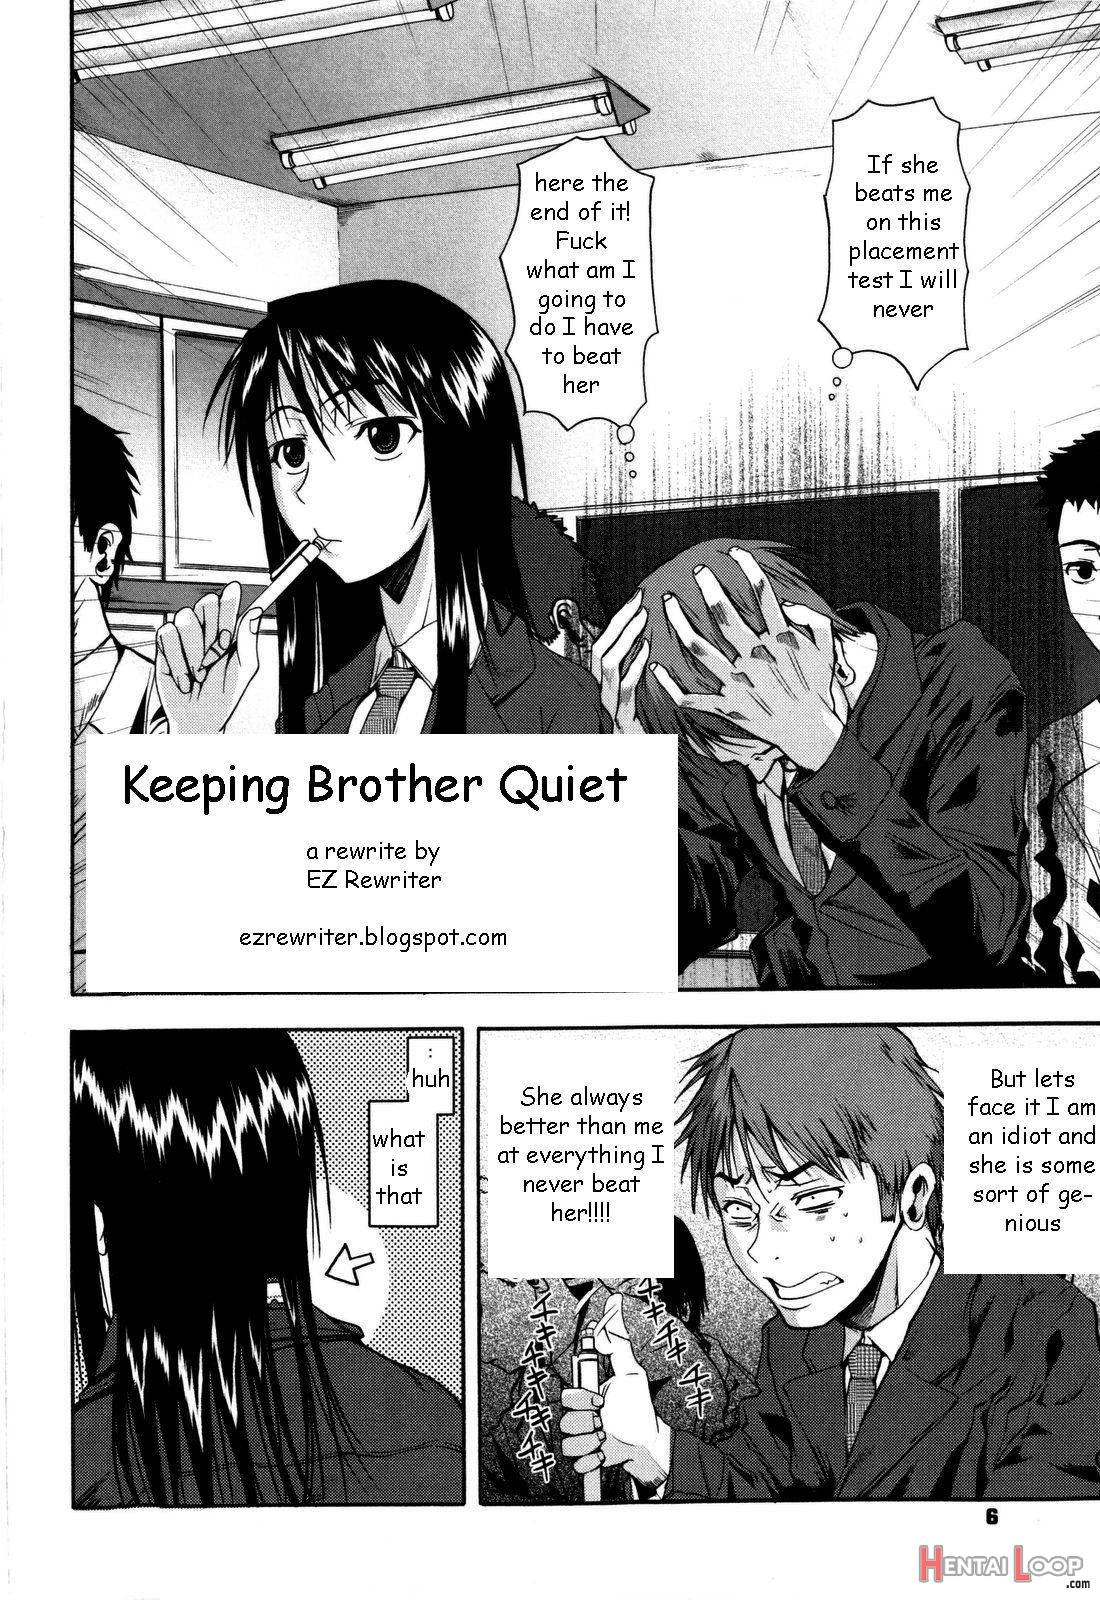 Keeping Brother Quiet page 2